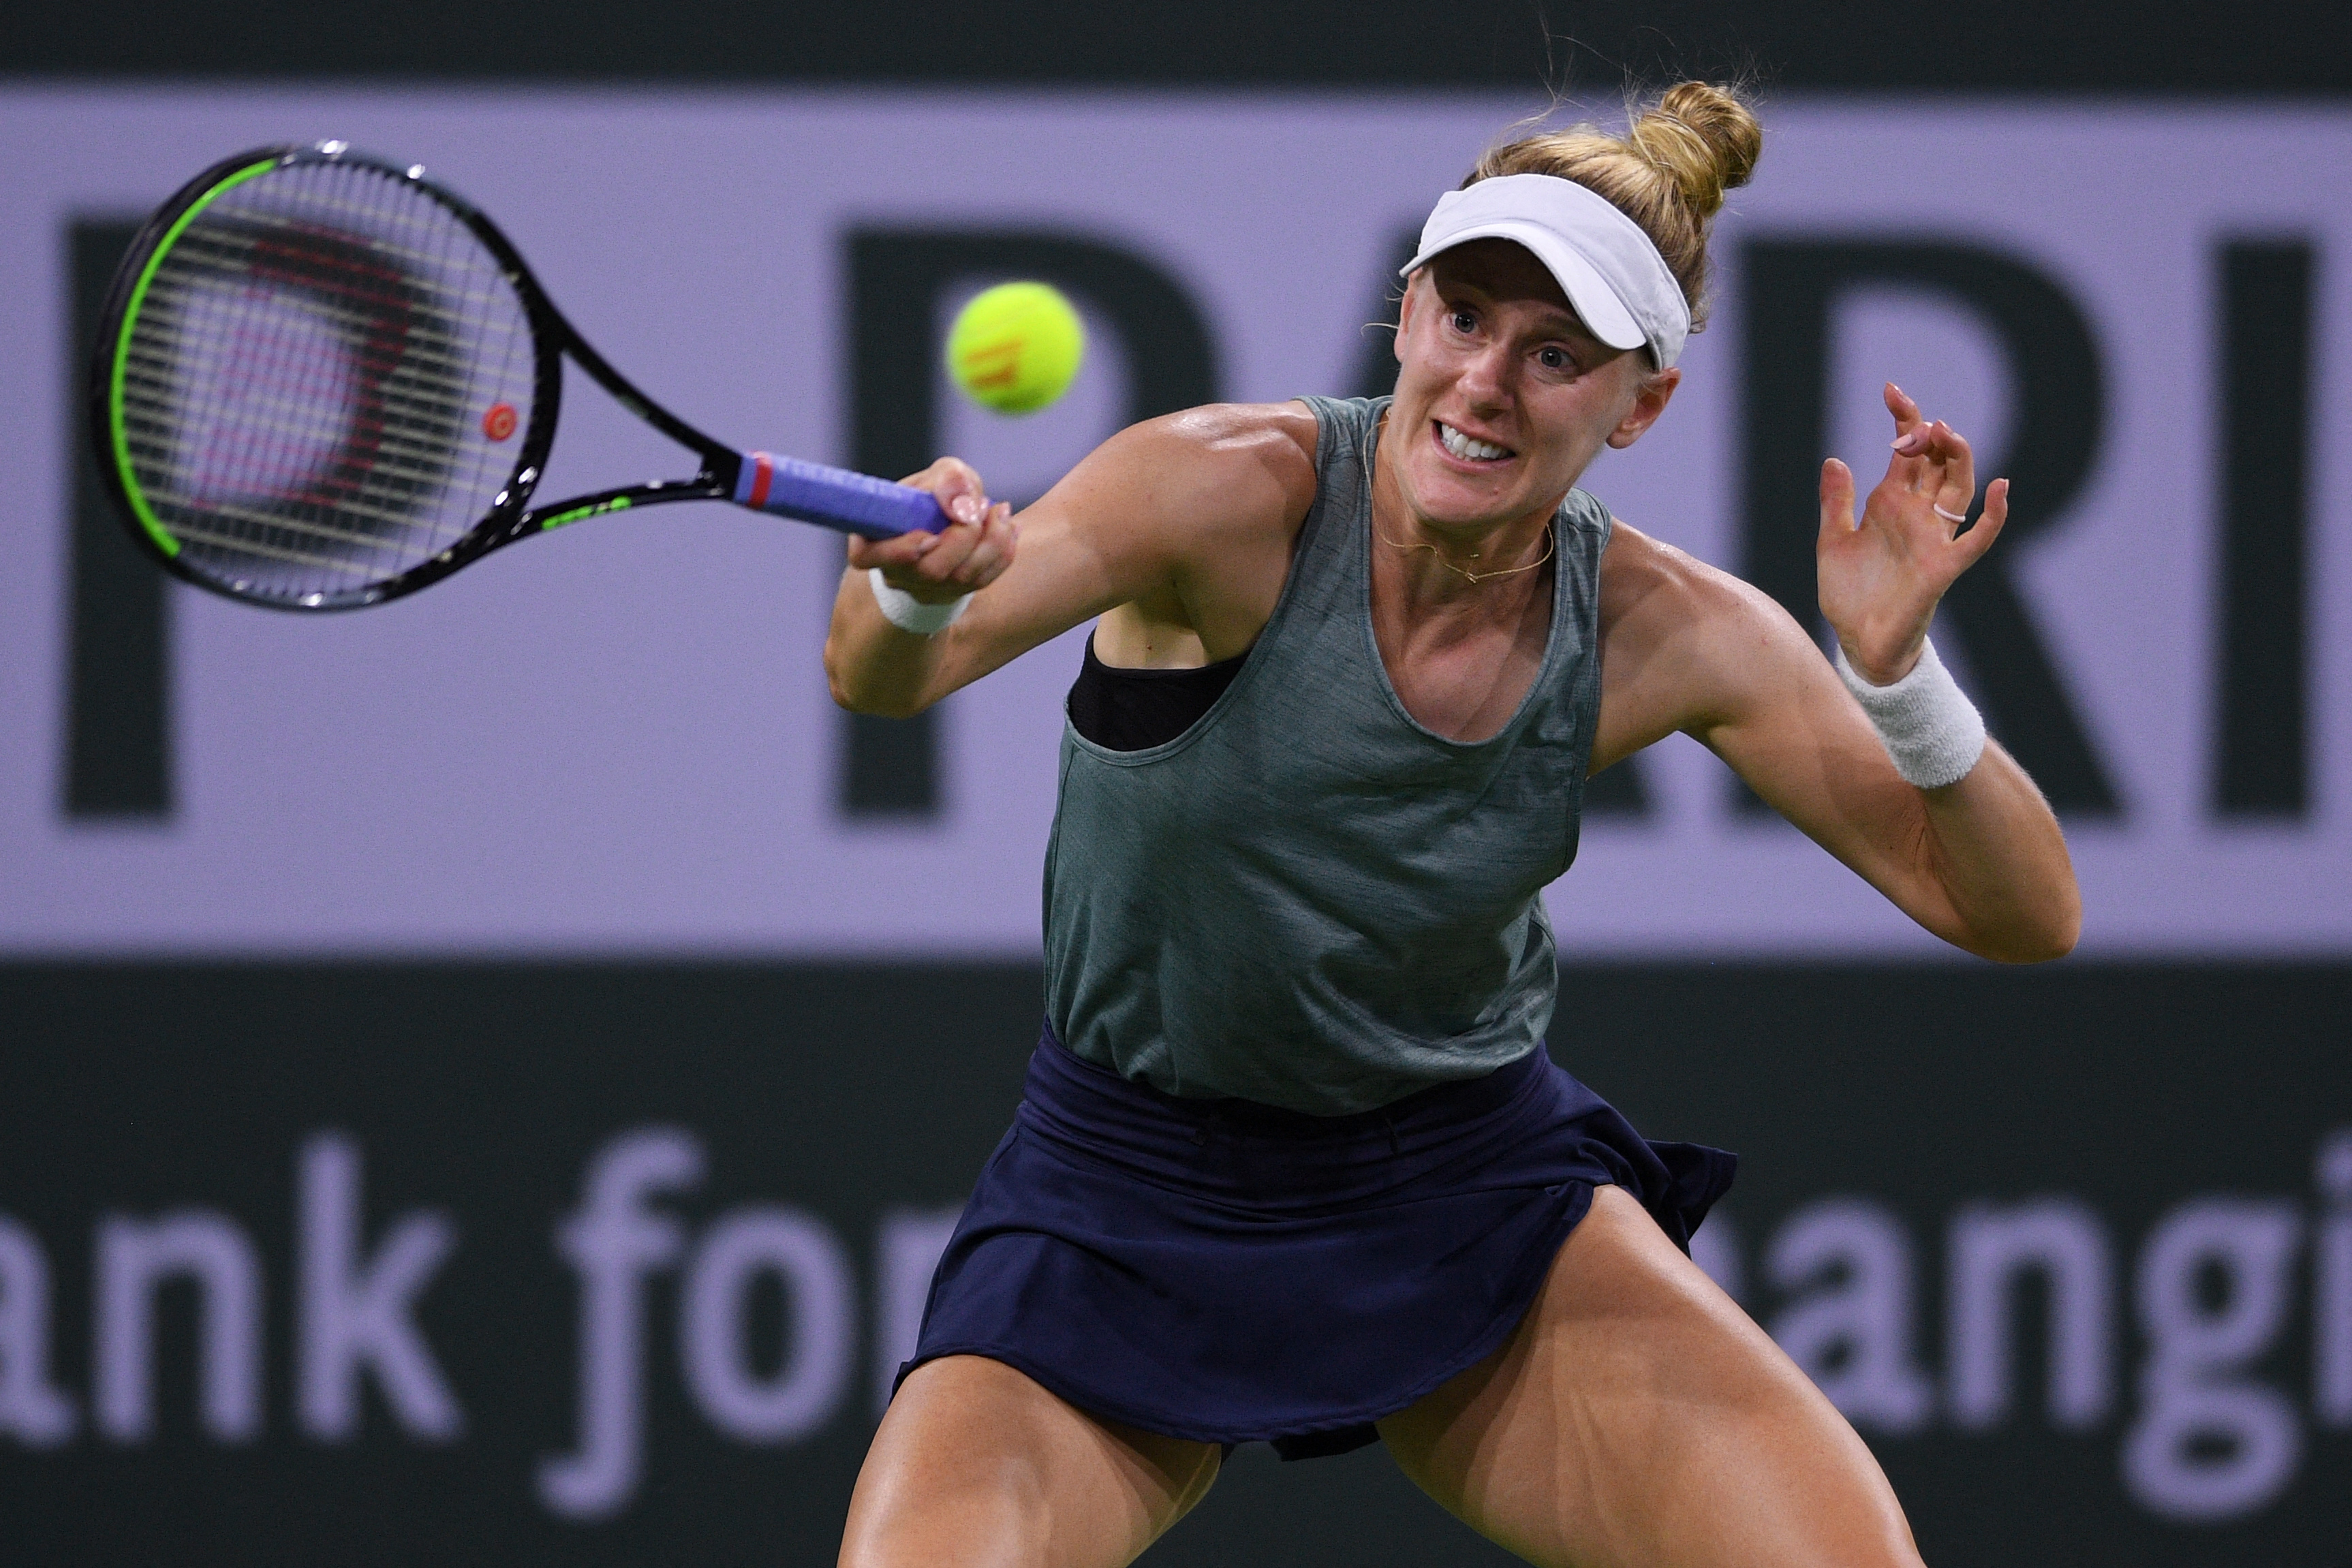 Oct 9, 2021; Indian Wells, CA, USA; Alison Riske (USA) hits a shot against Bianca Andreescu (CAN) at Indian Wells Tennis Garden. Mandatory Credit: Orlando Ramirez-USA TODAY Sports